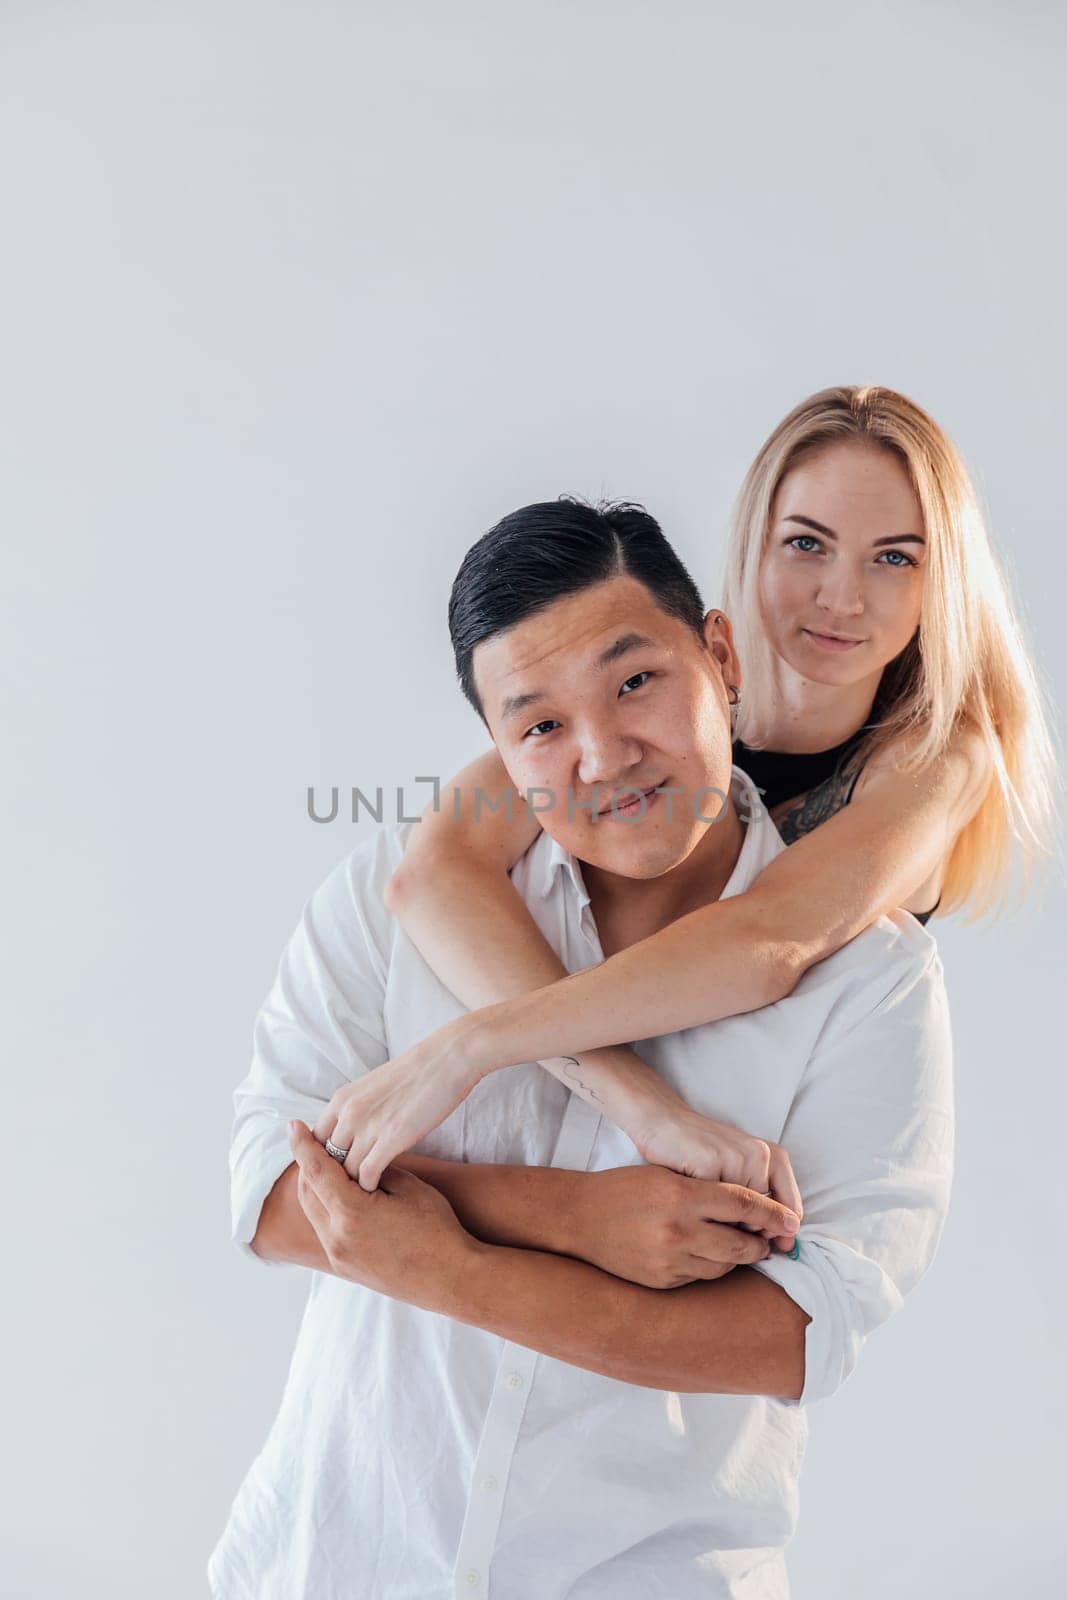 a woman hugs a man in love couple on a light background by Simakov